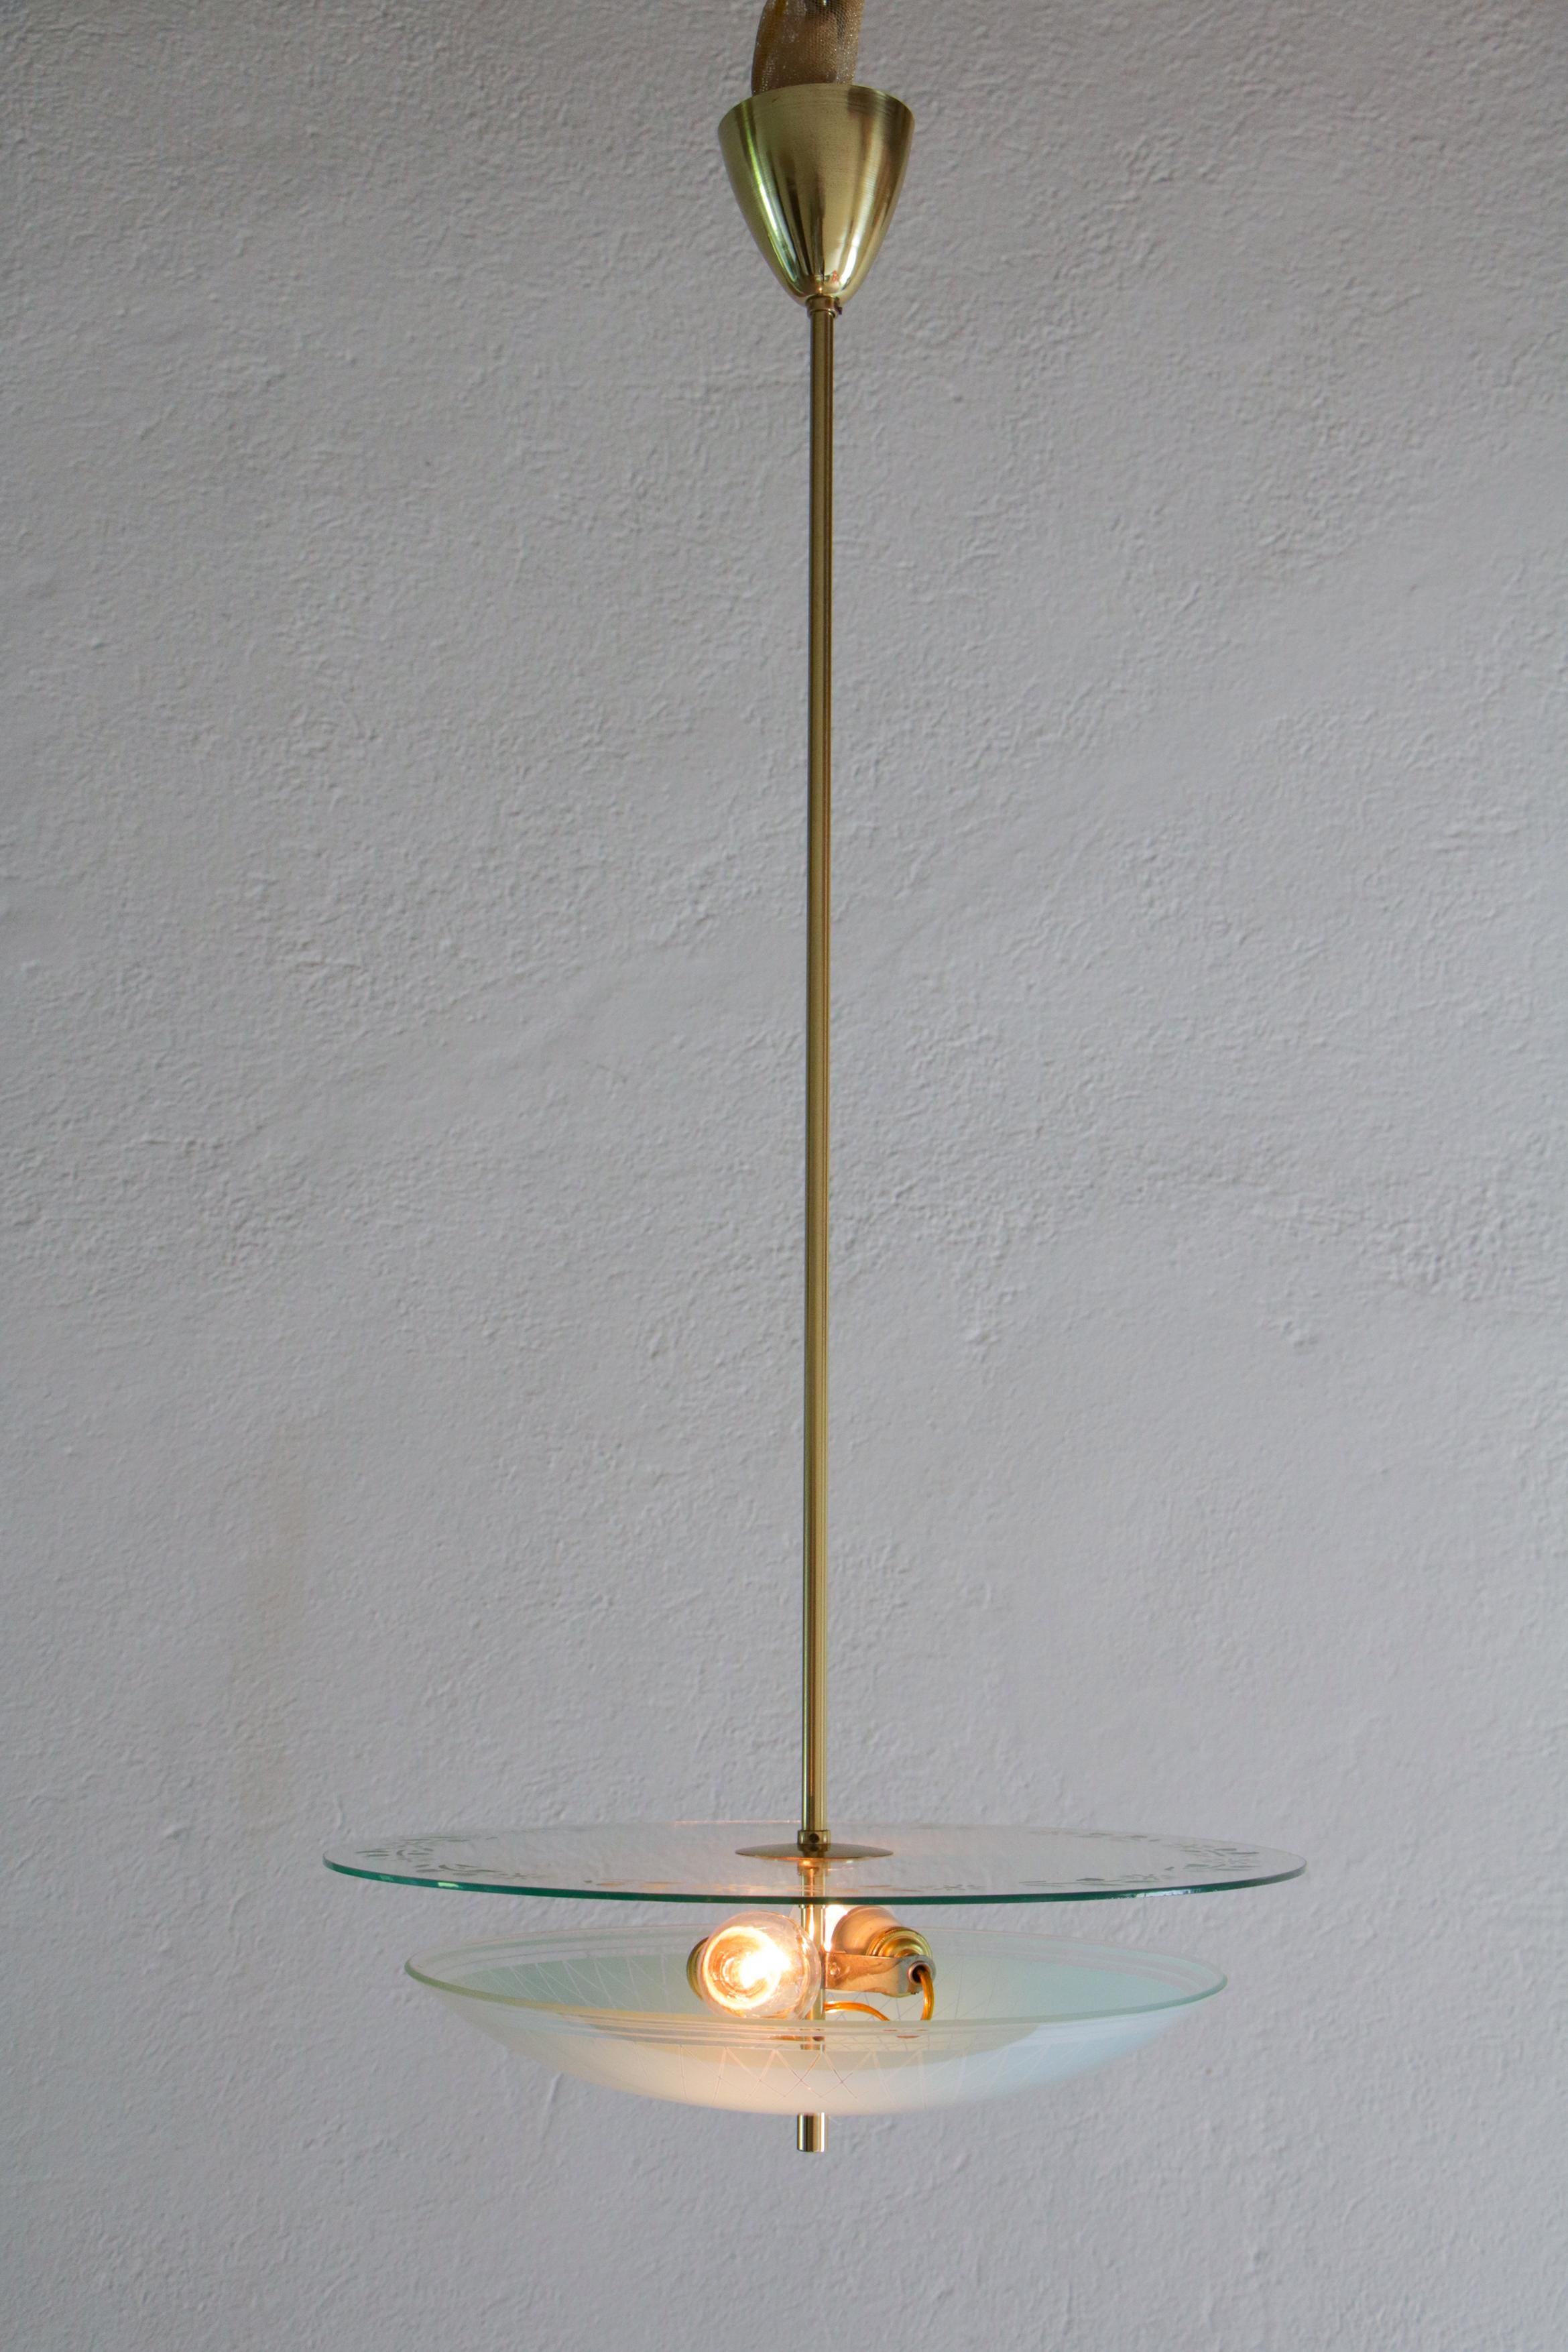 Mid-Century Modern Italian Mid-Century Double Disc Pendant Lamp in Turquoise Color, 1950s For Sale